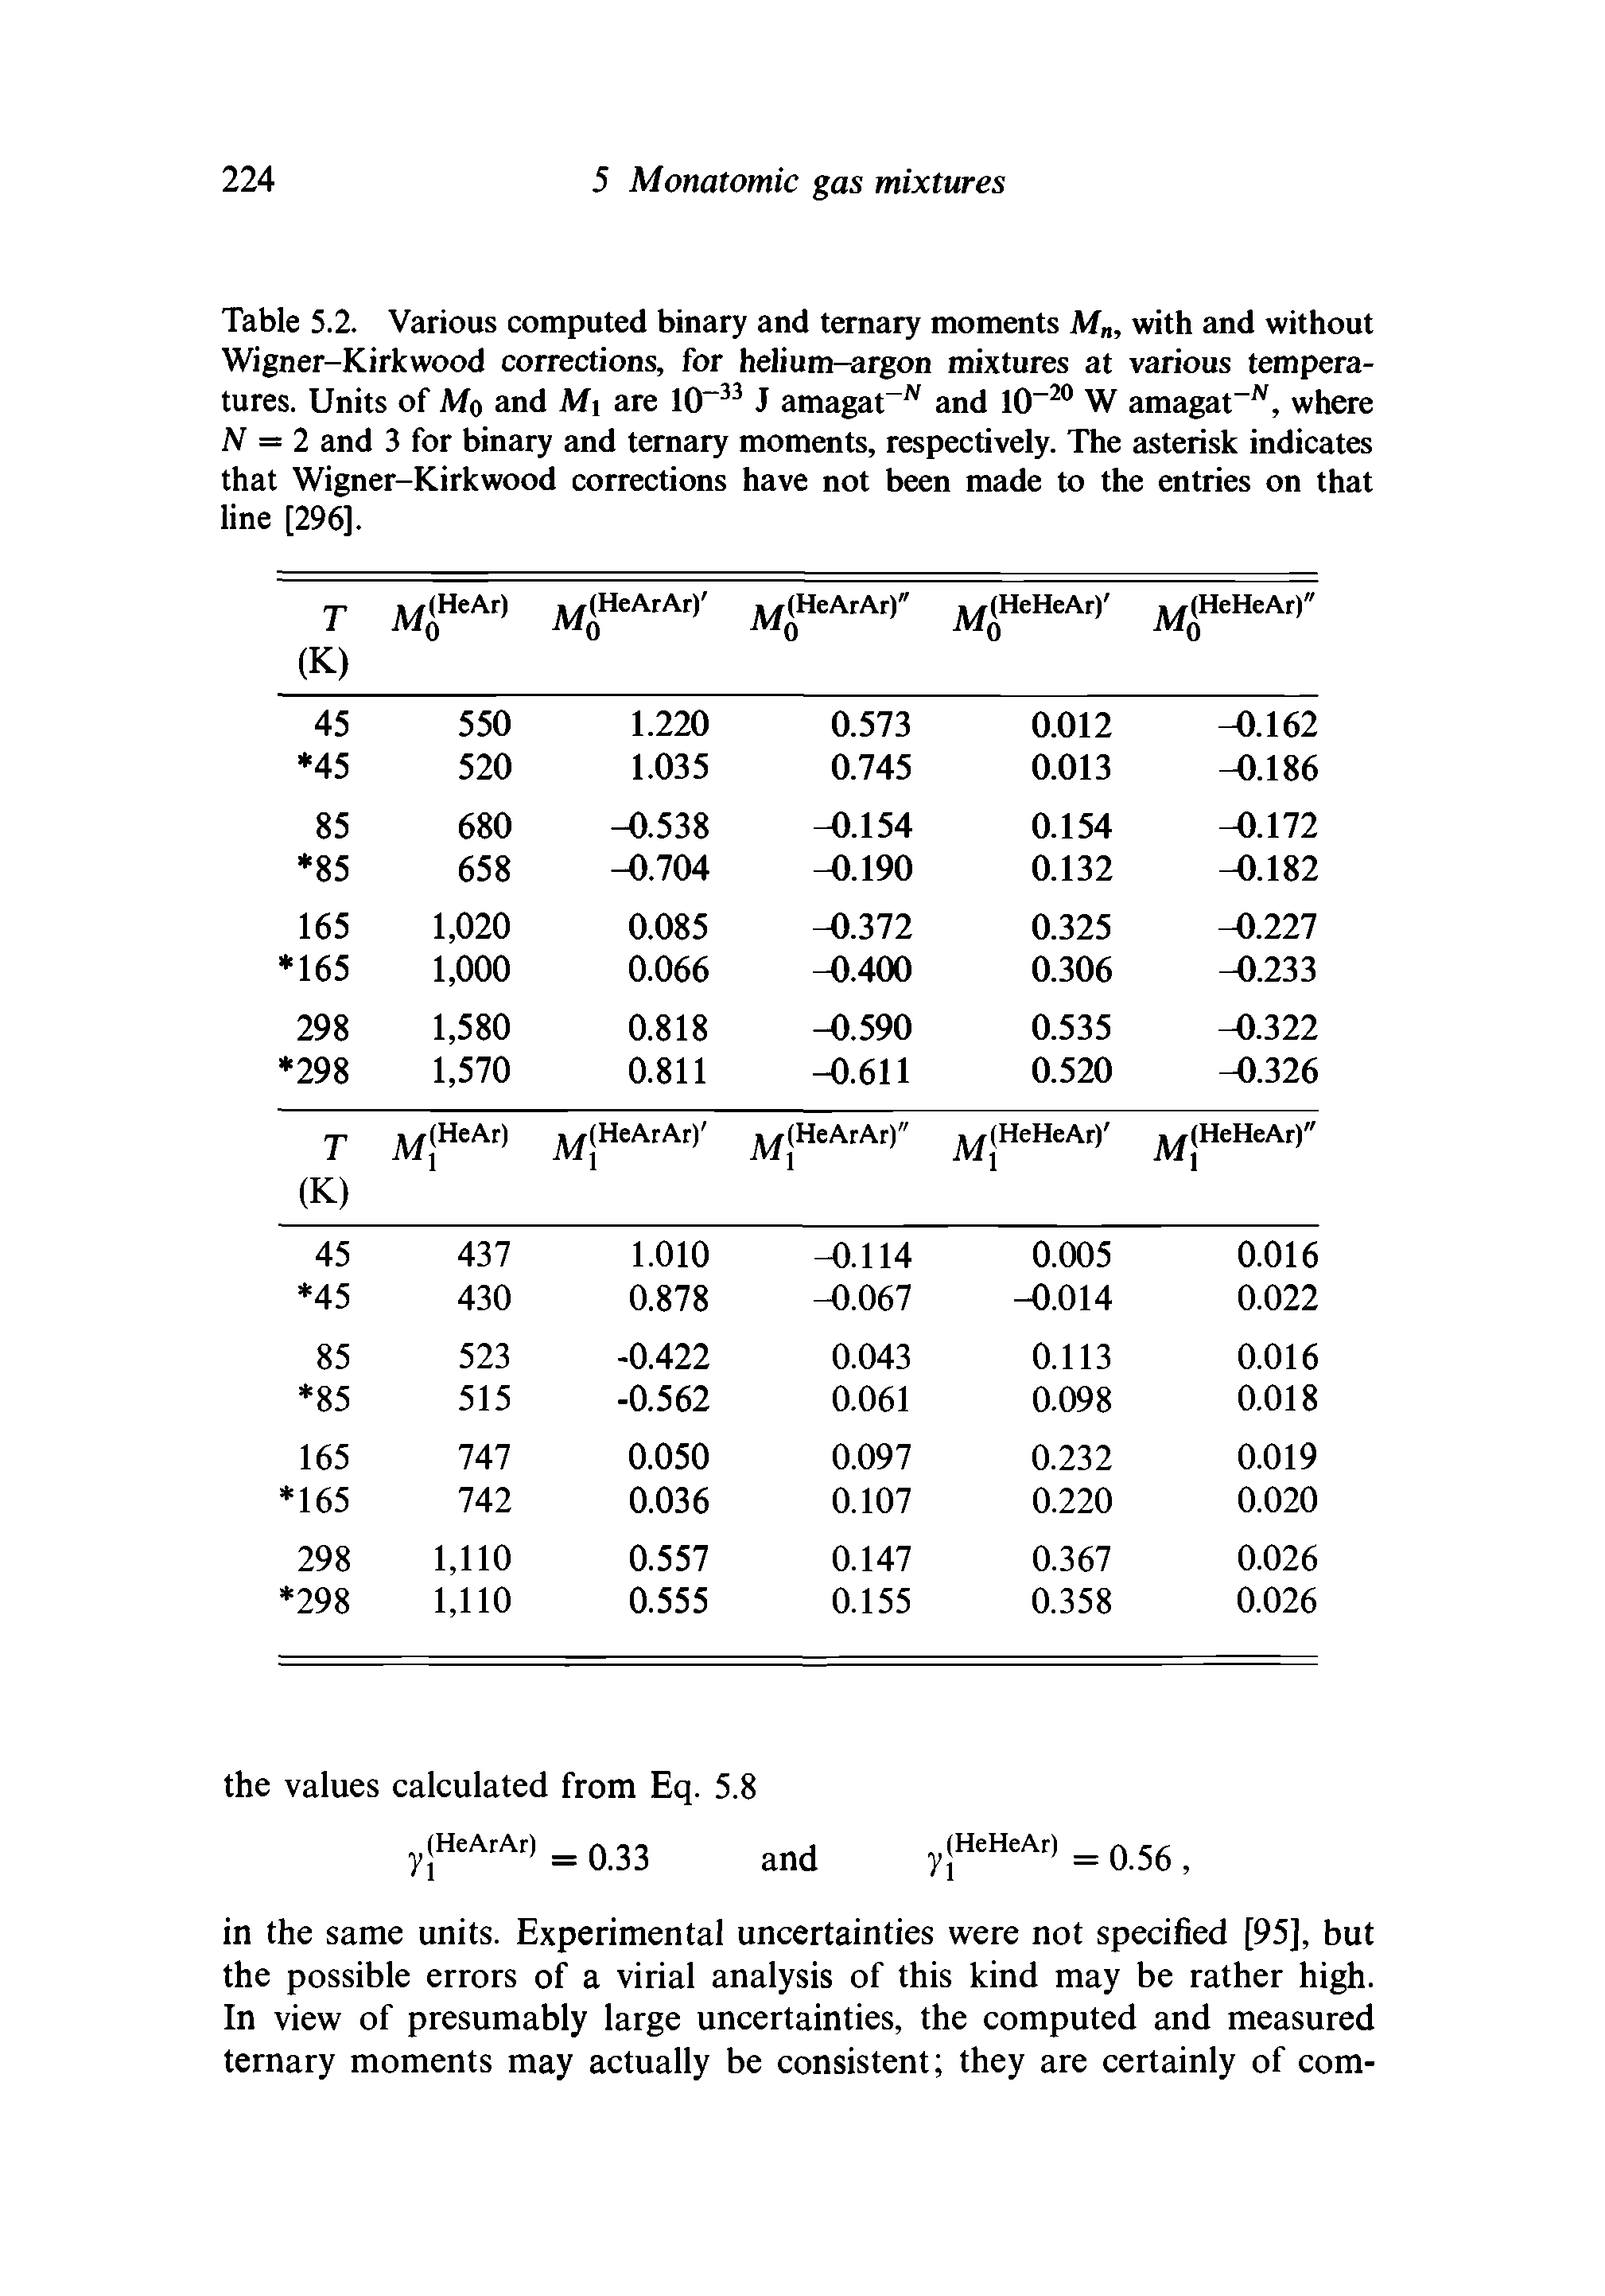 Table 5.2. Various computed binary and ternary moments M , with and without Wigner-Kirkwood corrections, for helium-argon mixtures at various temperatures. Units of Mo and Mi are 10 33 J amagat N and 10-20 W amagat N, where N = 2 and 3 for binary and ternary moments, respectively. The asterisk indicates that Wigner-Kirkwood corrections have not been made to the entries on that line [296].